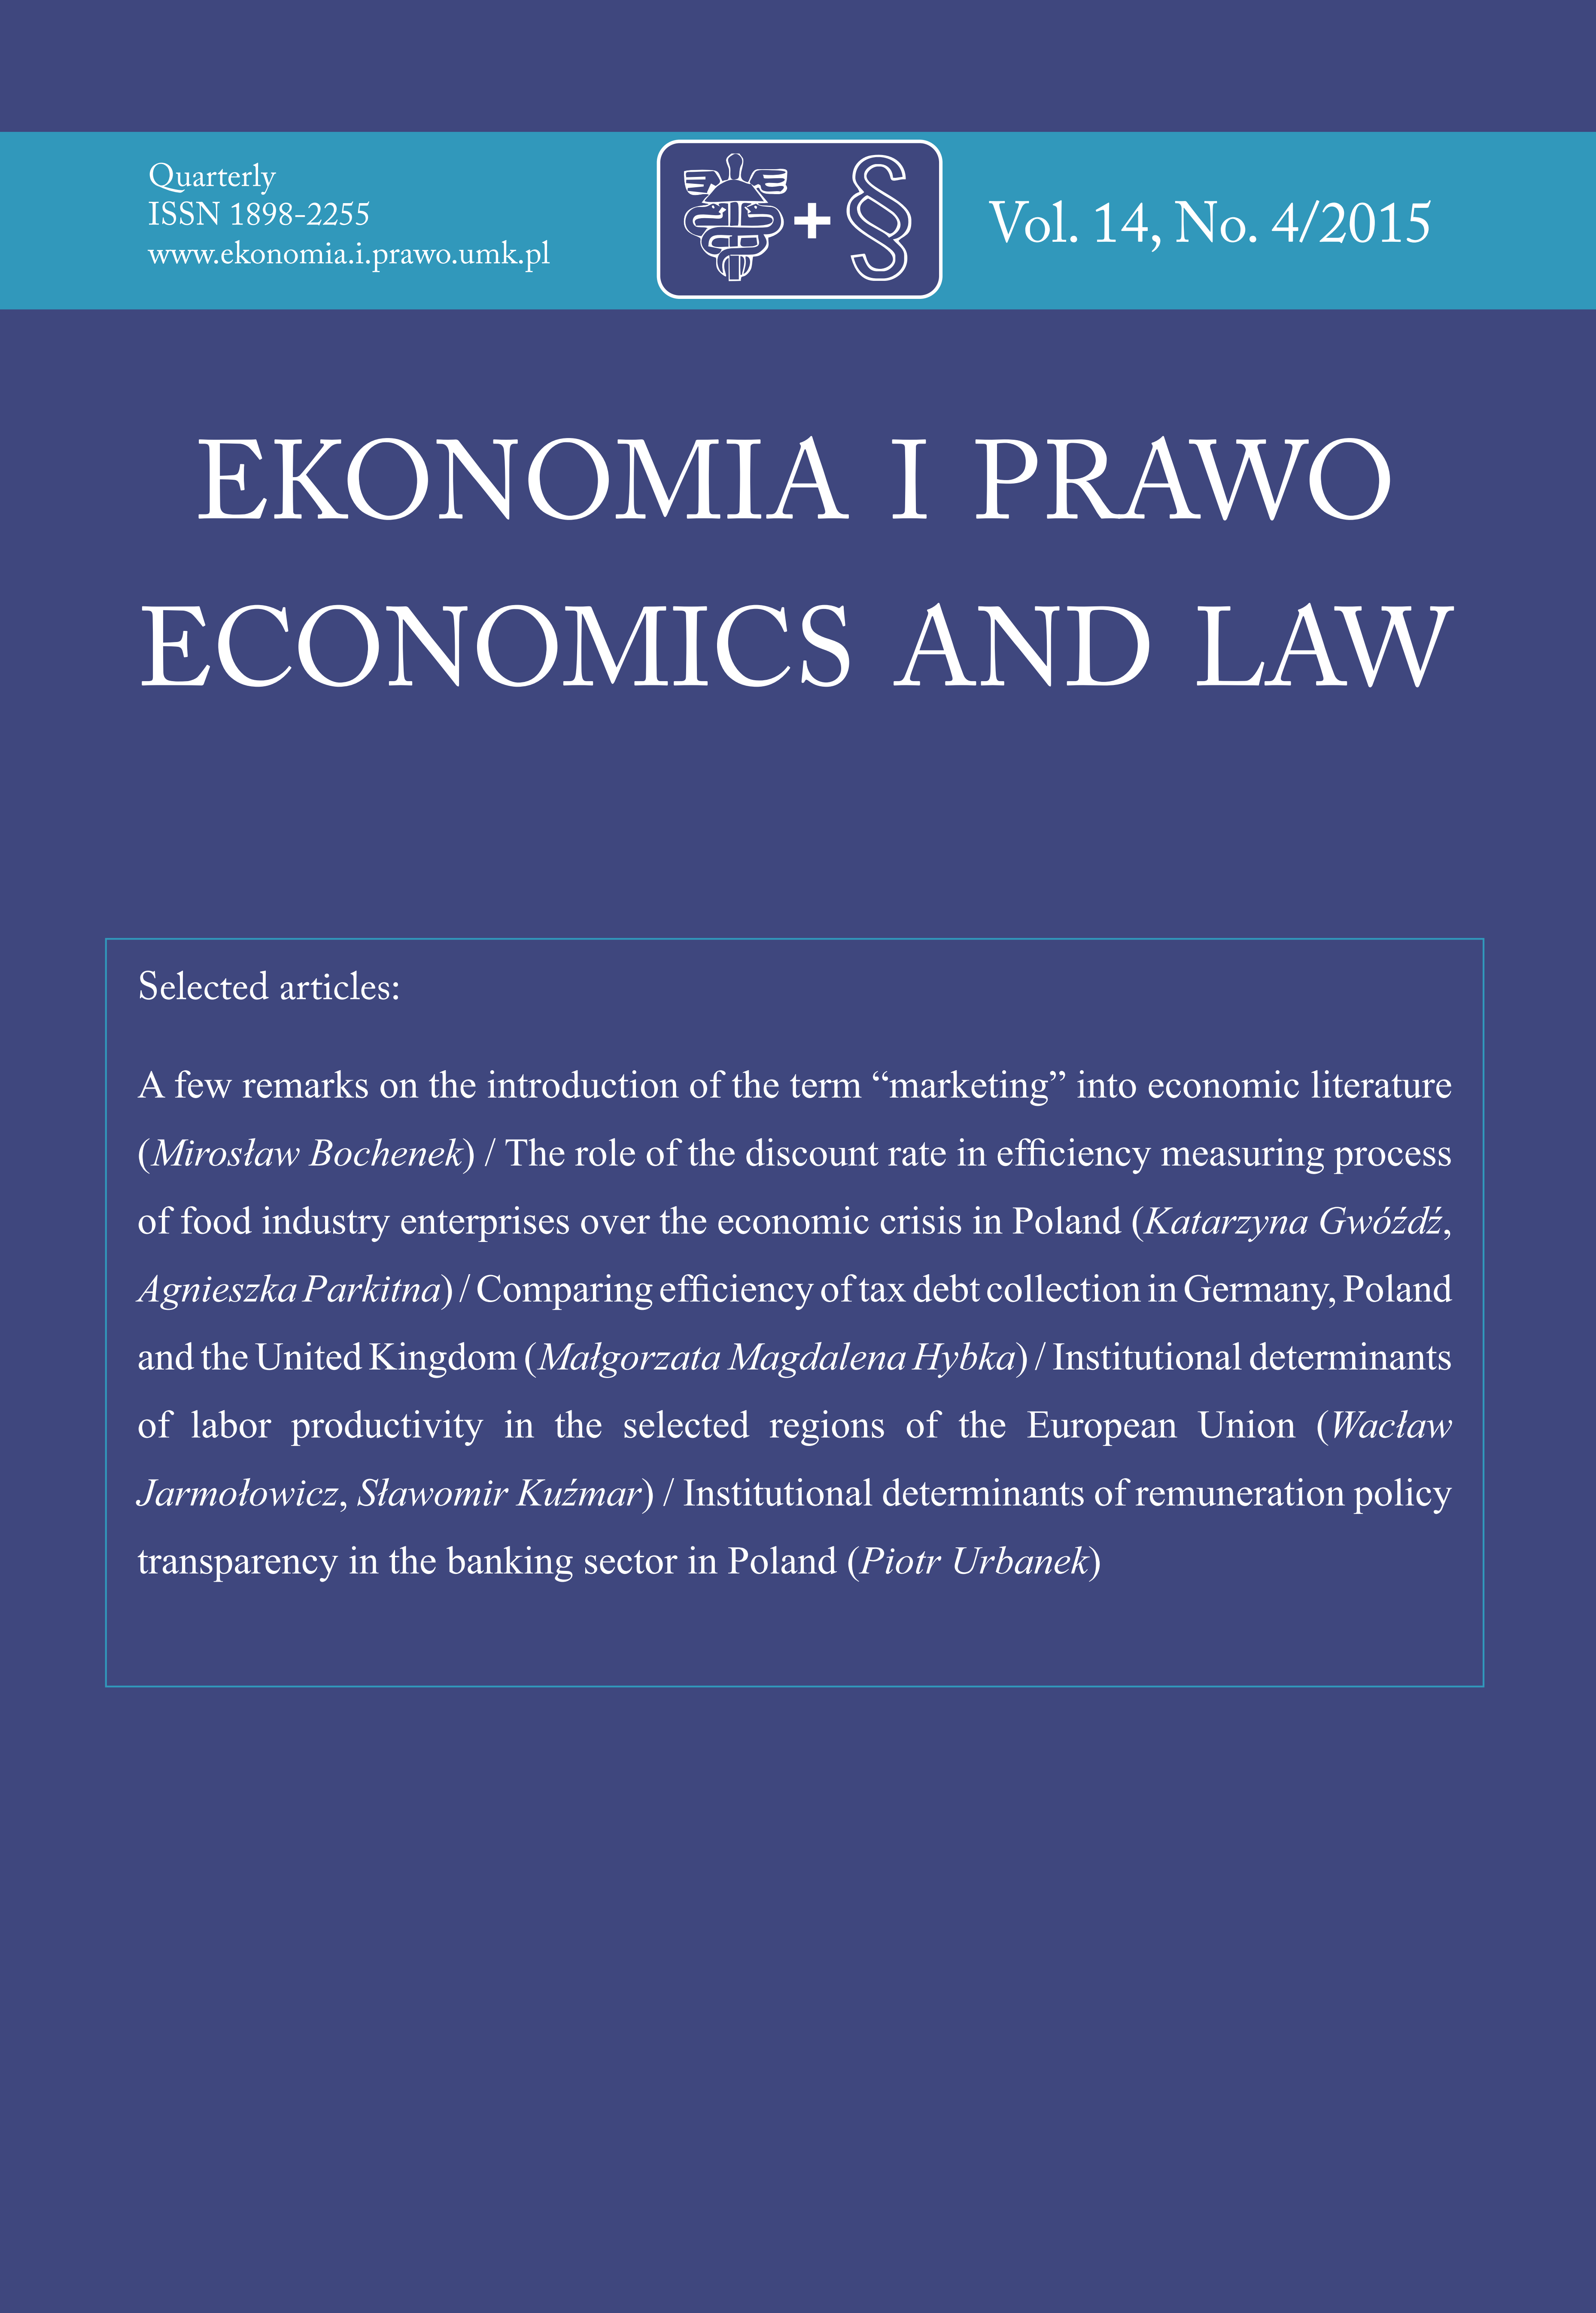 MICROECONOMIC AND MACROECONOMIC DETERMINANTS OF THE DIVIDEND POLICY IN COMPANIES QUOTED AT WARSAW STOCK EXCHANGE — RESEARCH RESULTS Cover Image